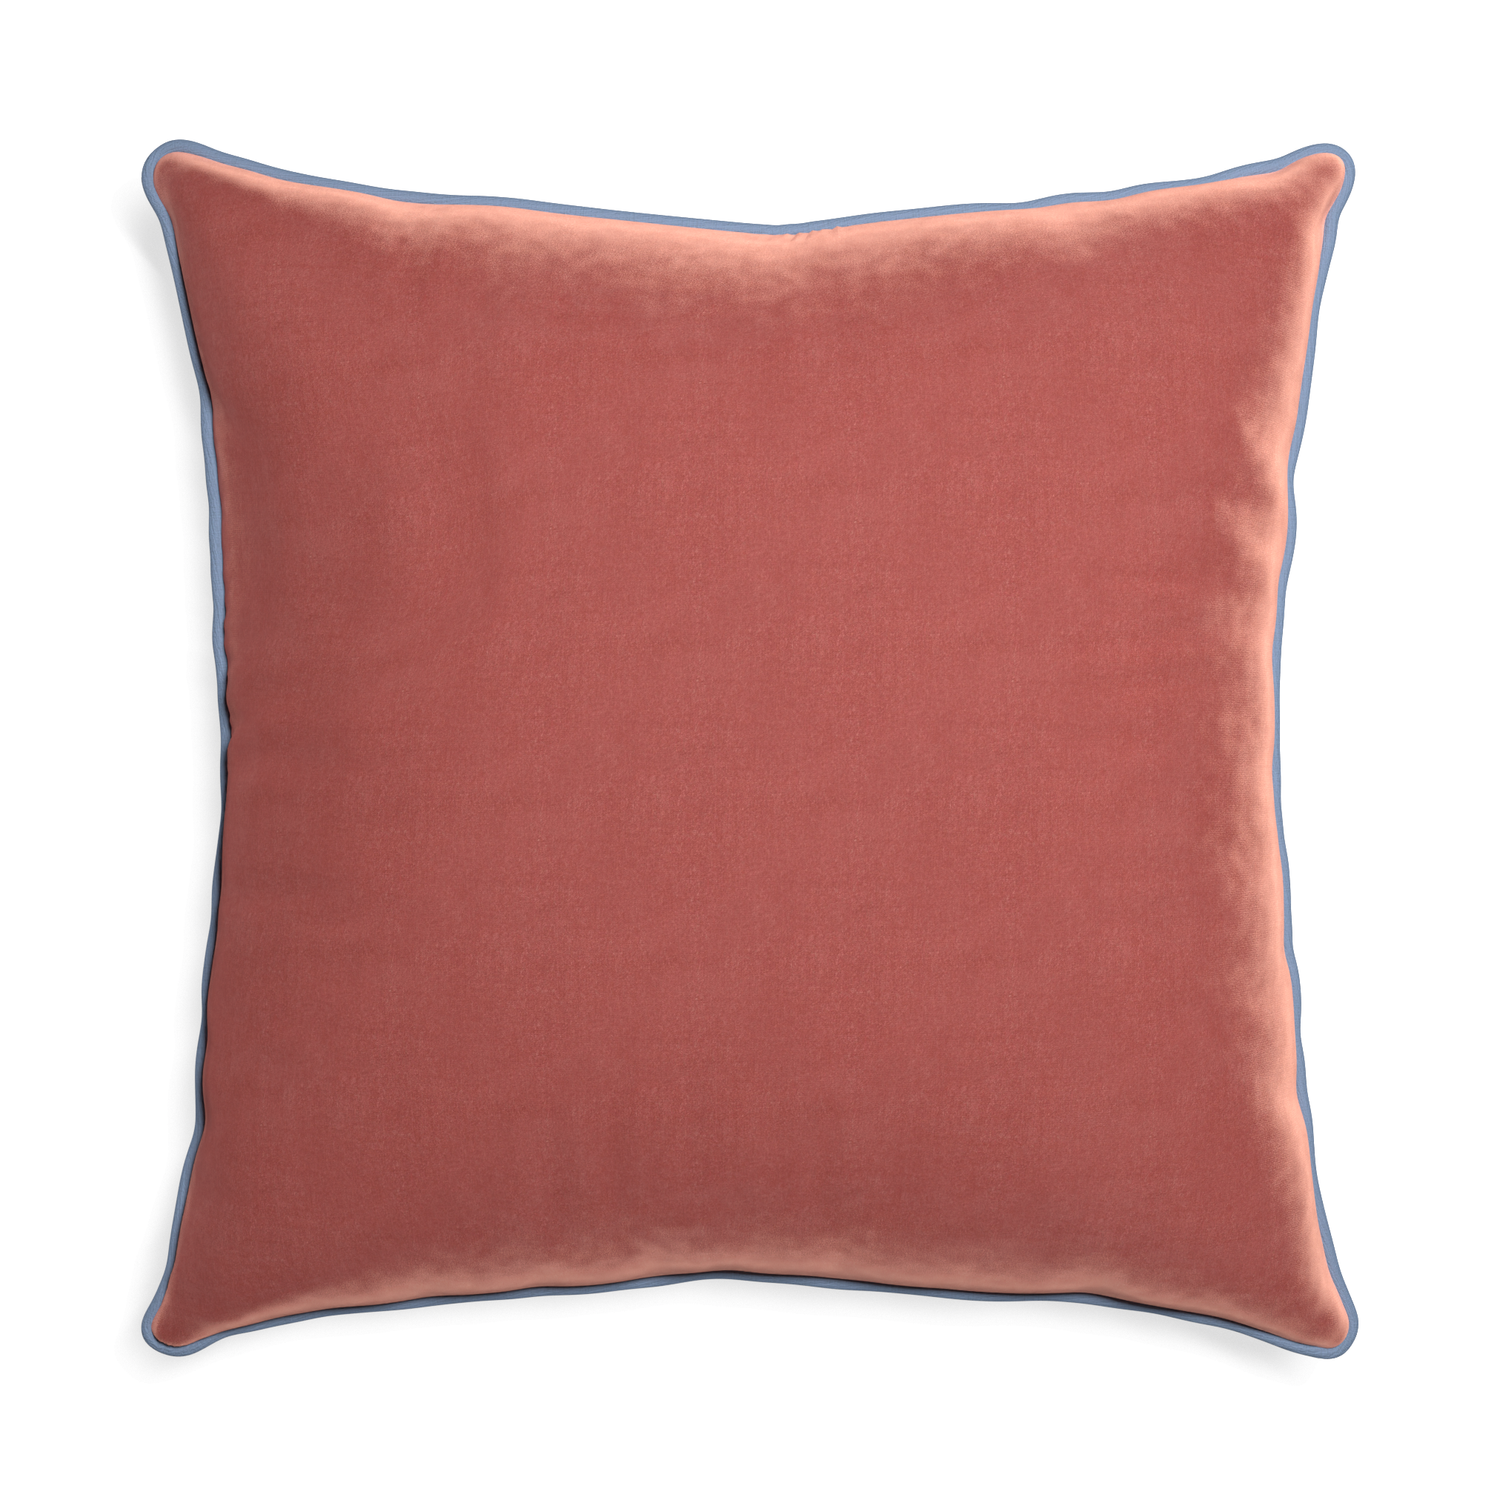 square coral velvet pillow with sky blue piping